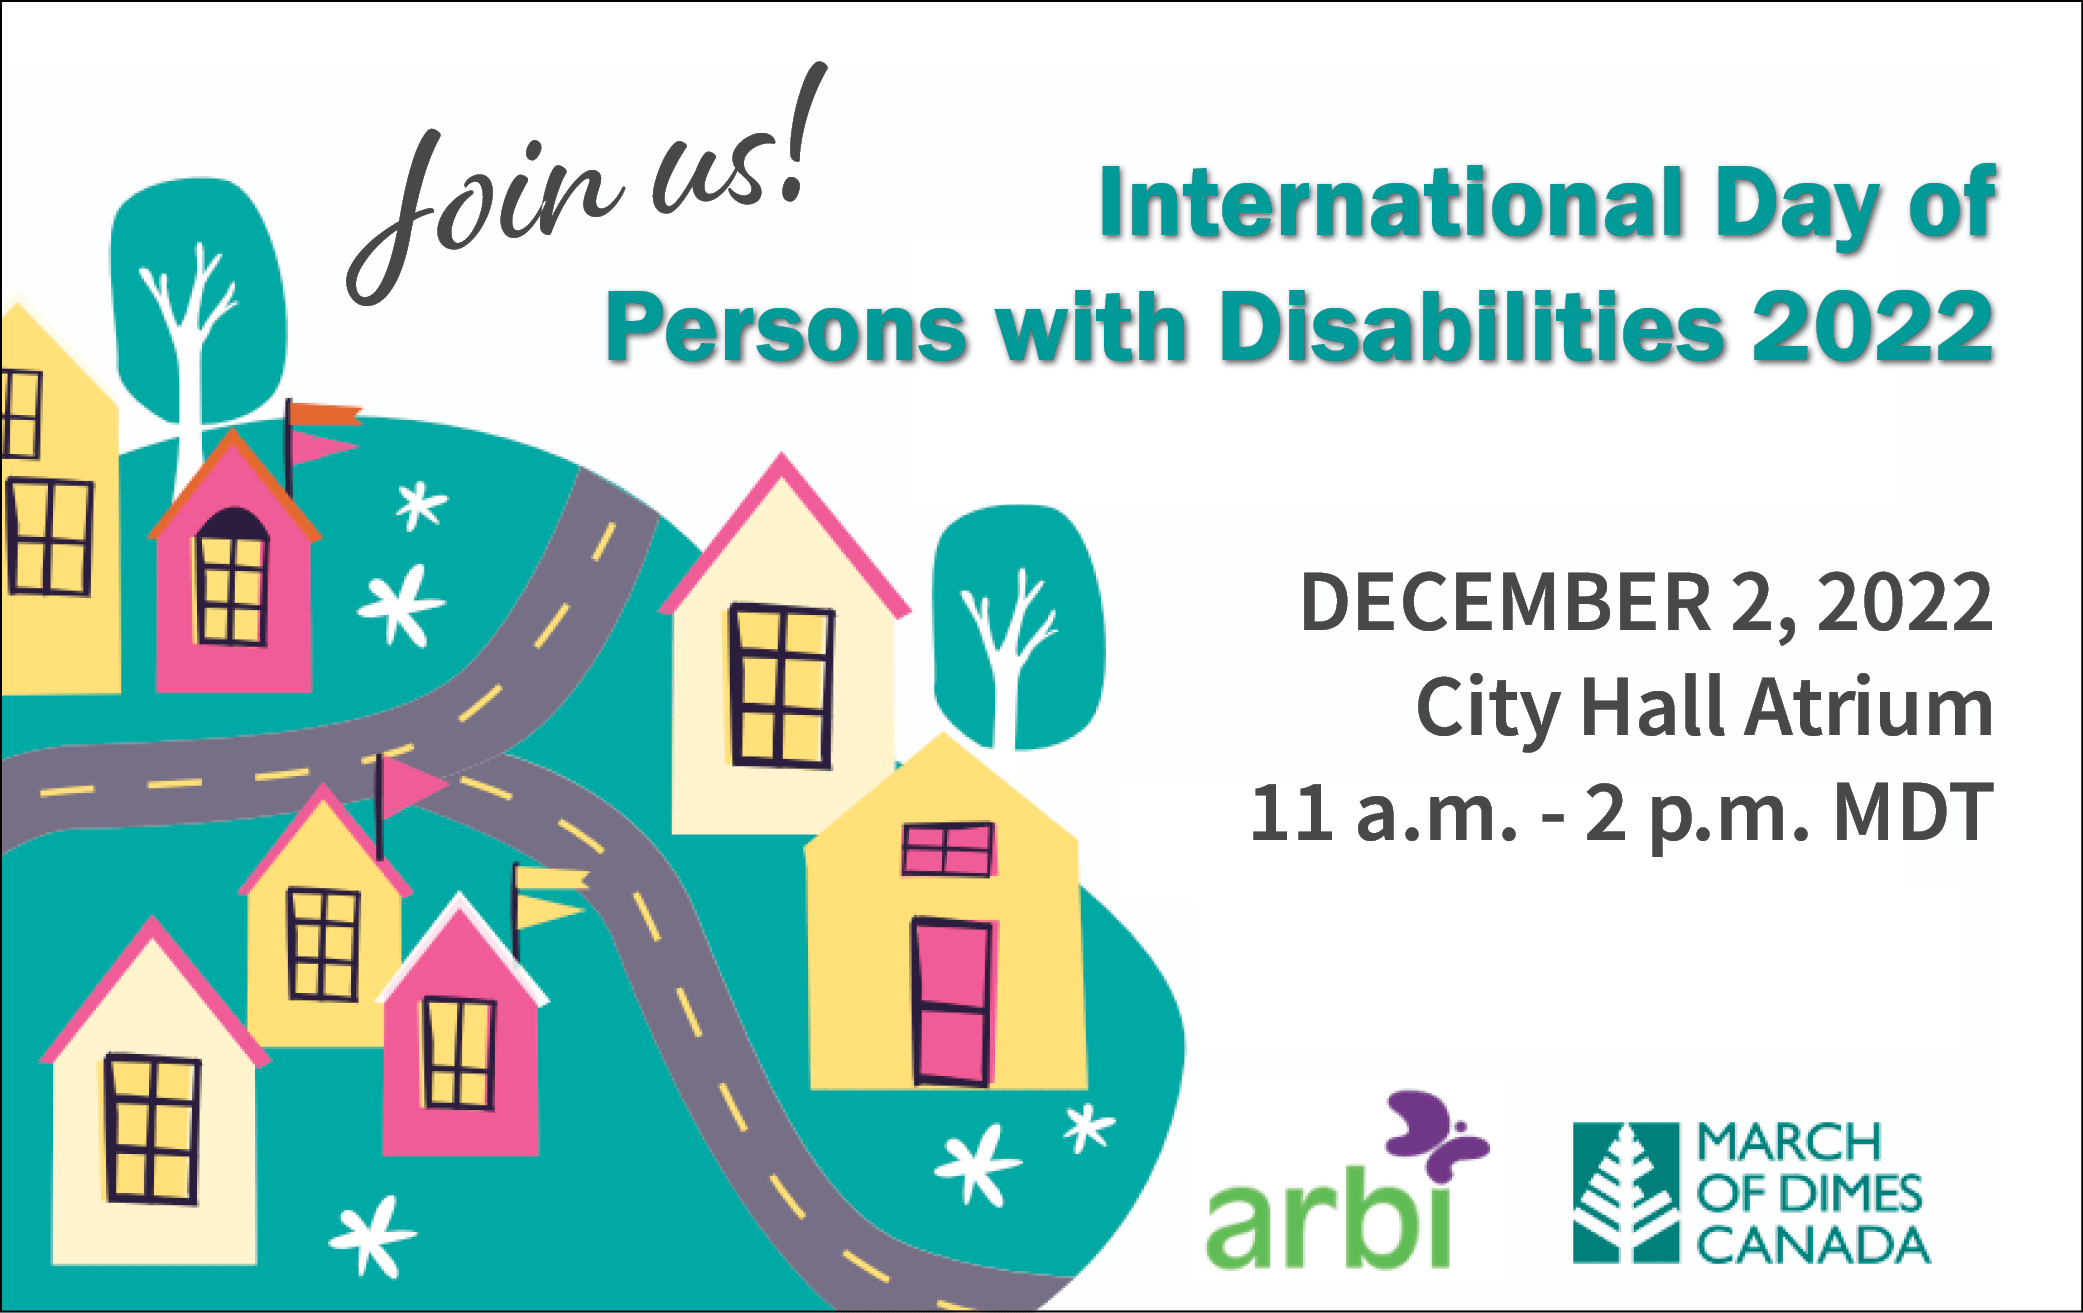 International Day of Persons with Disabilities, IDPD 2022